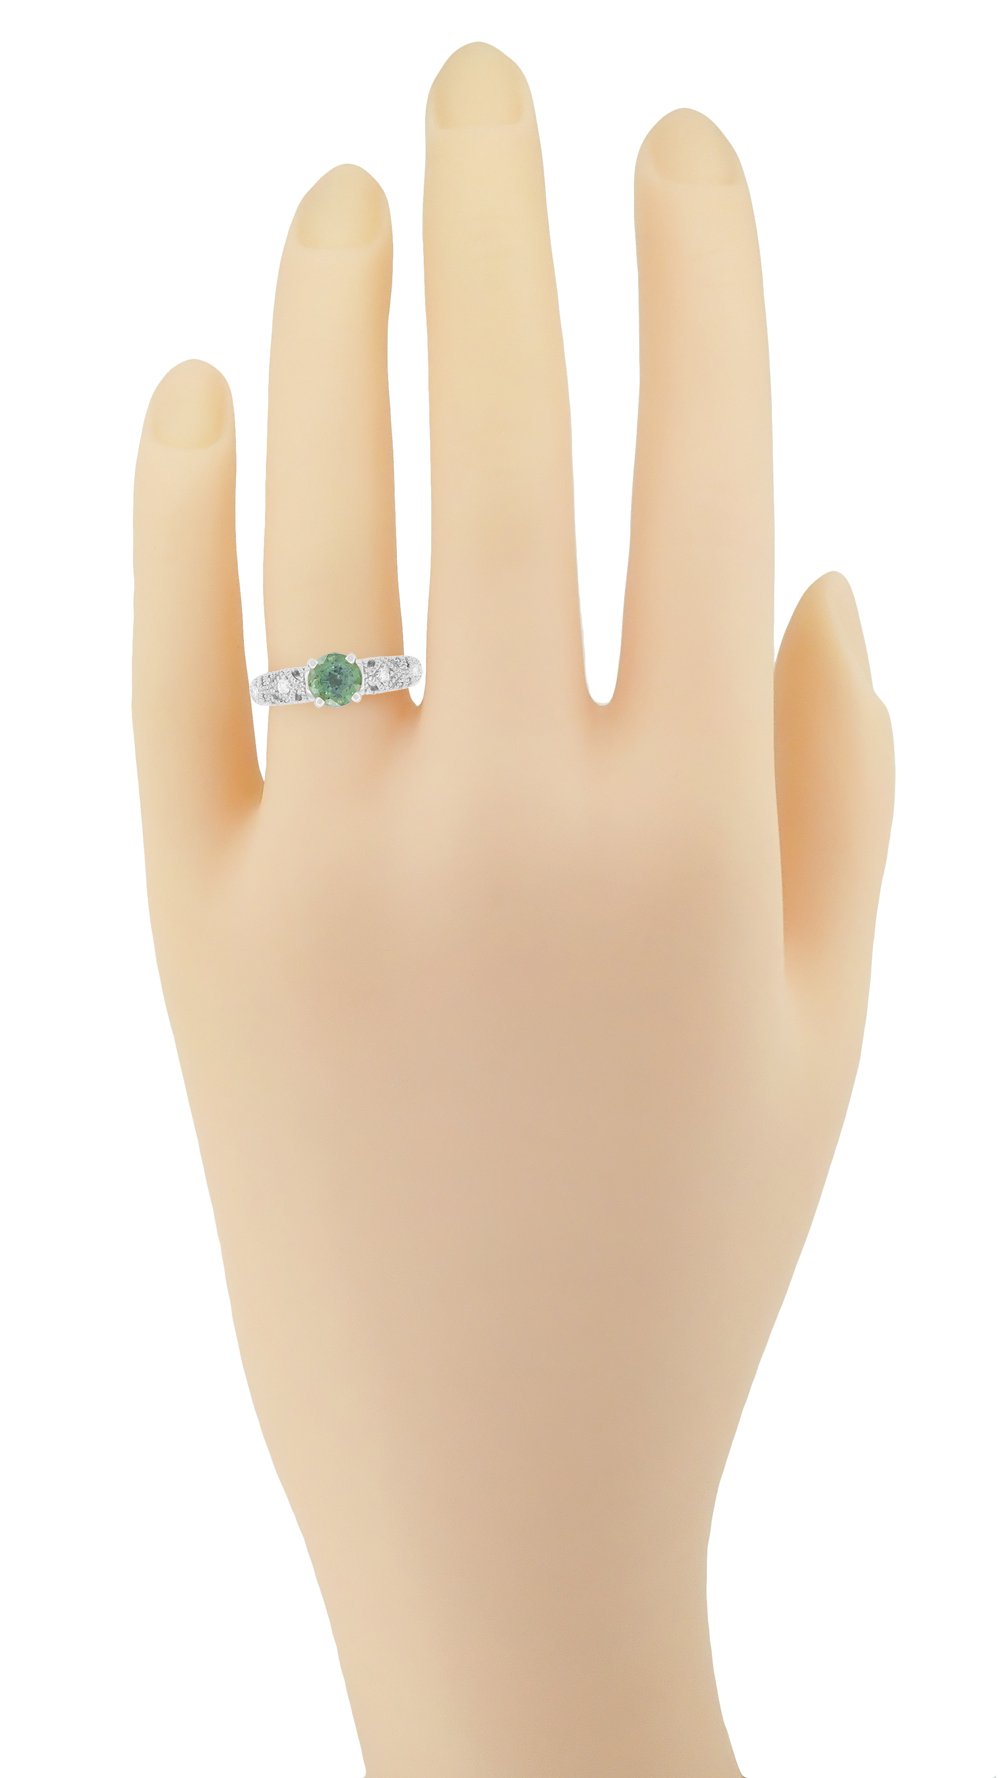 Freda Antique Inspired Filigree Green Sapphire and Diamond Engagement Ring in 14K White Gold - Item: R1190W2GS - Image: 8